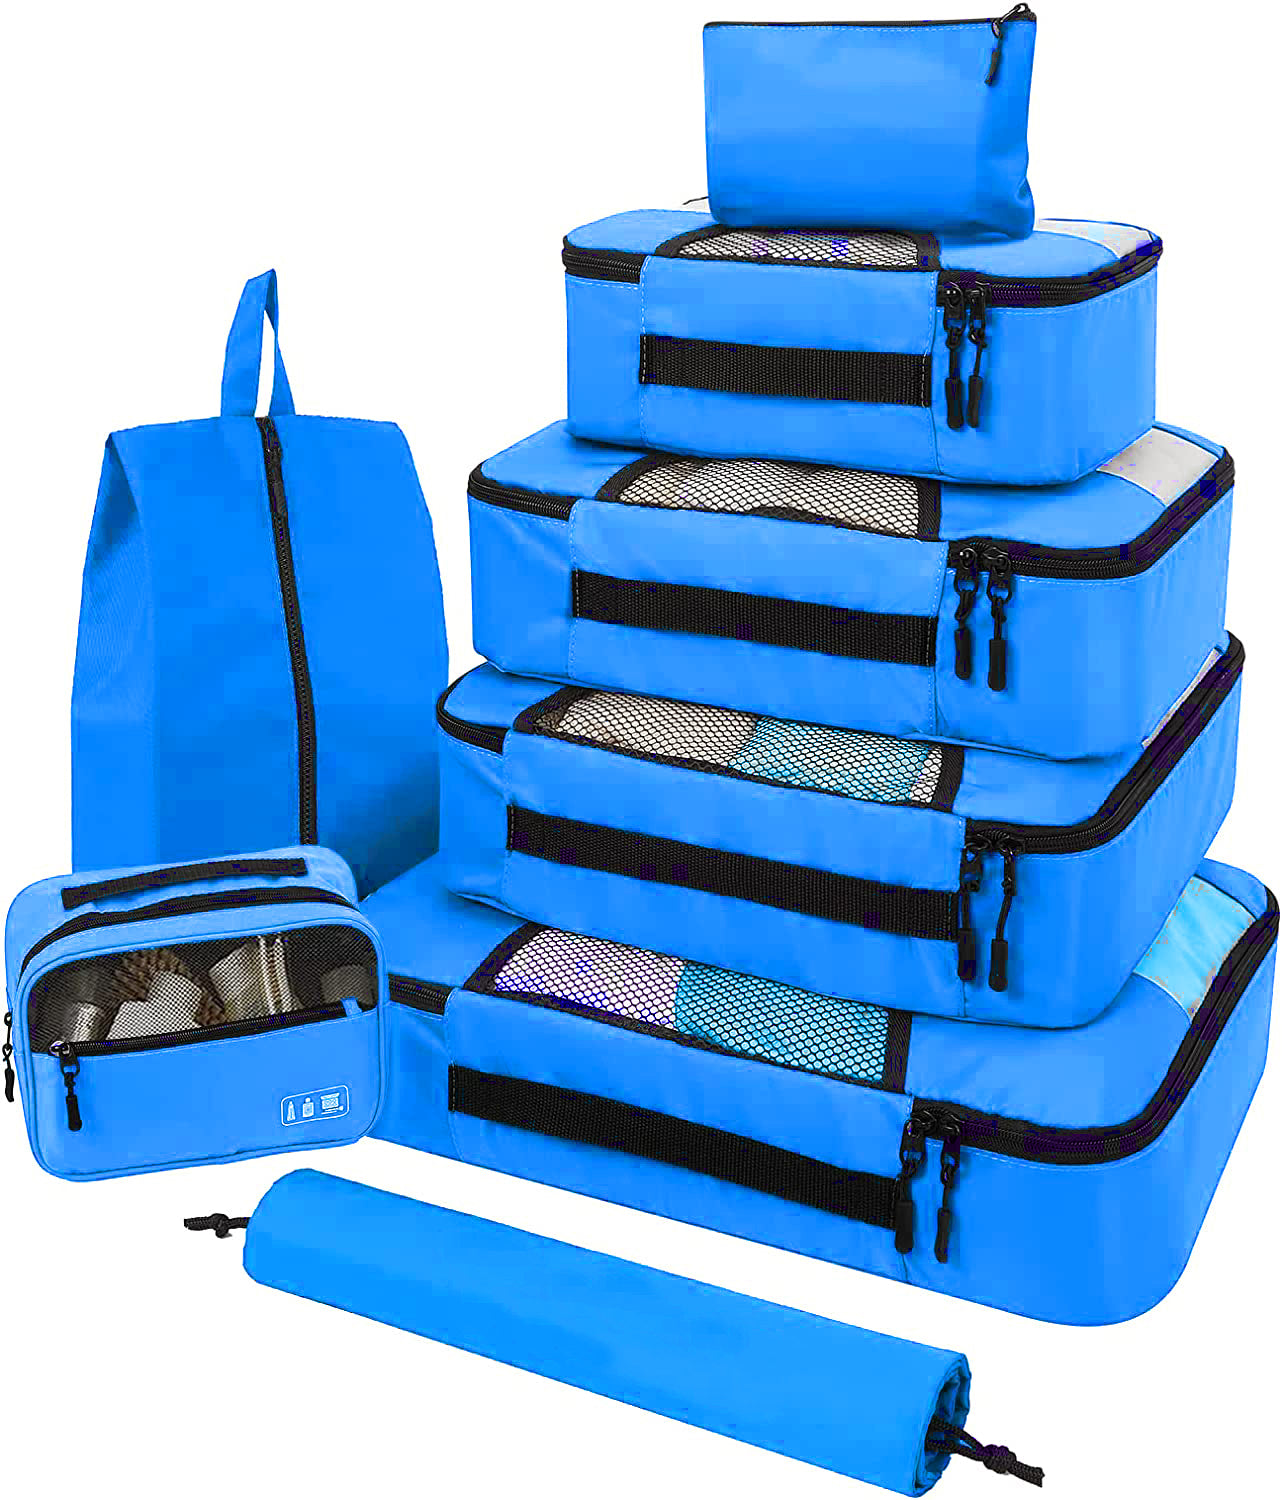 Packing Cubes | 6 Set | Color Pool Blue | Veken - aborderproducts